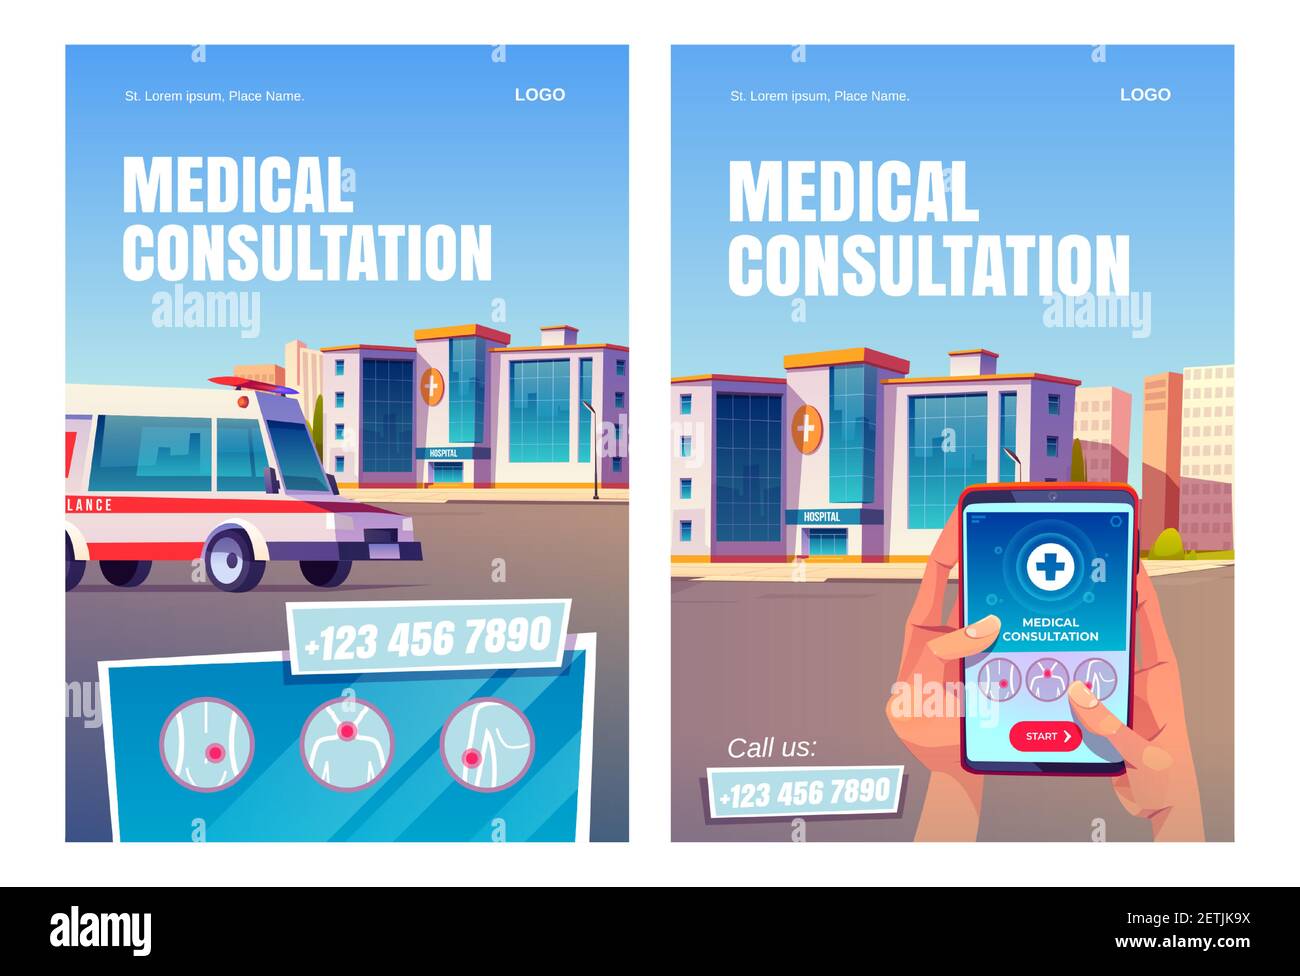 Online medical consultation app cartoon posters. Hands hold smartphone with application interface on hospital building background with ambulance on city street. Medicine, call service, vector banners Stock Vector